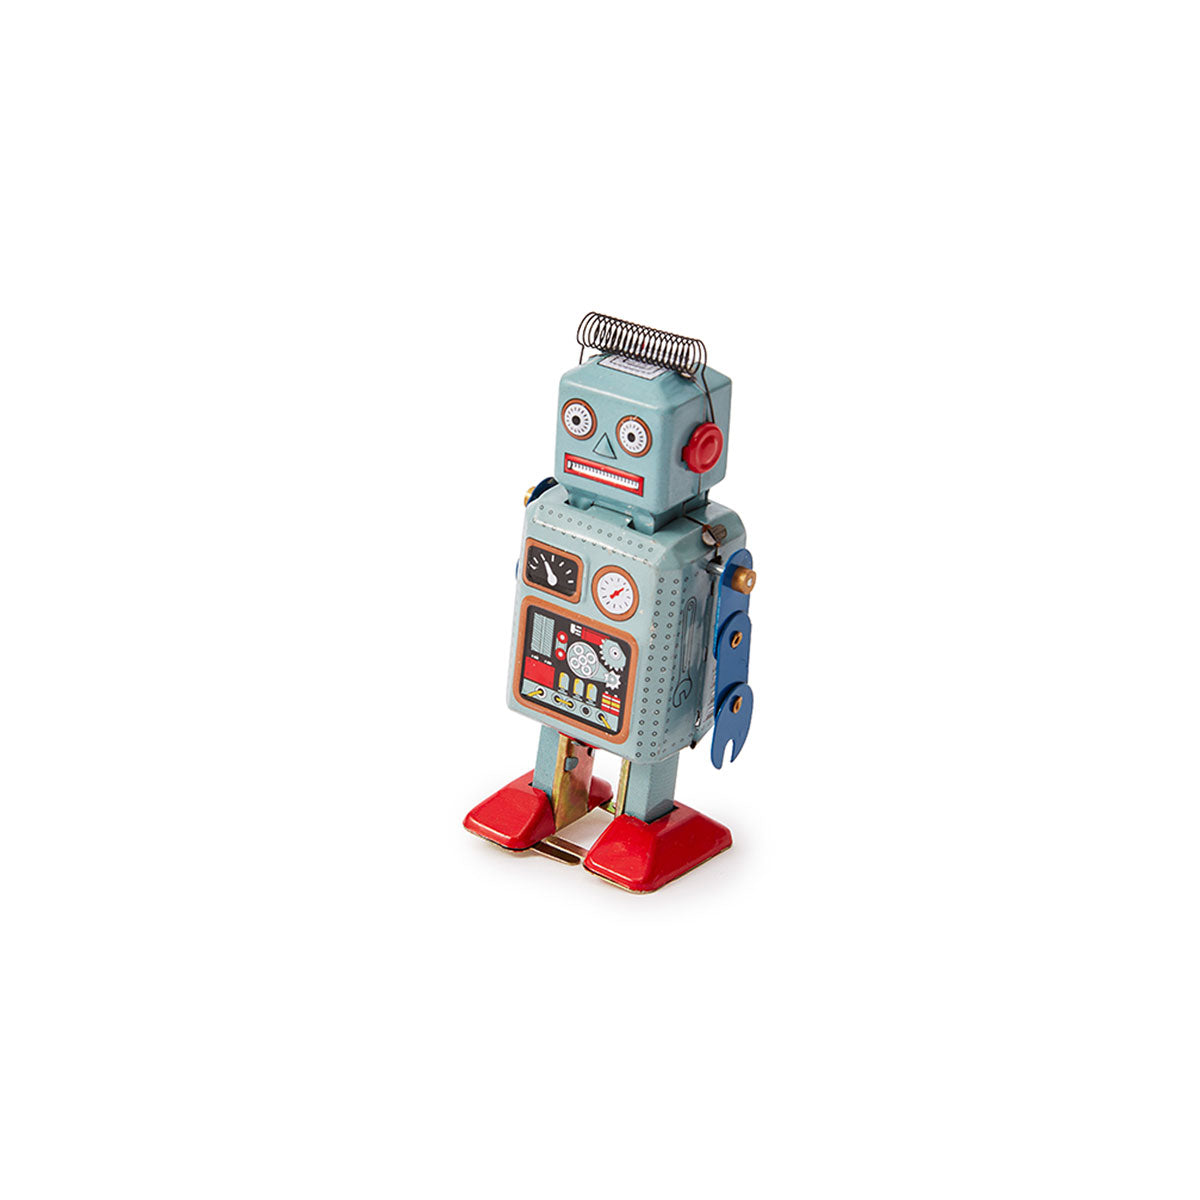 Mechanical Robot Toy